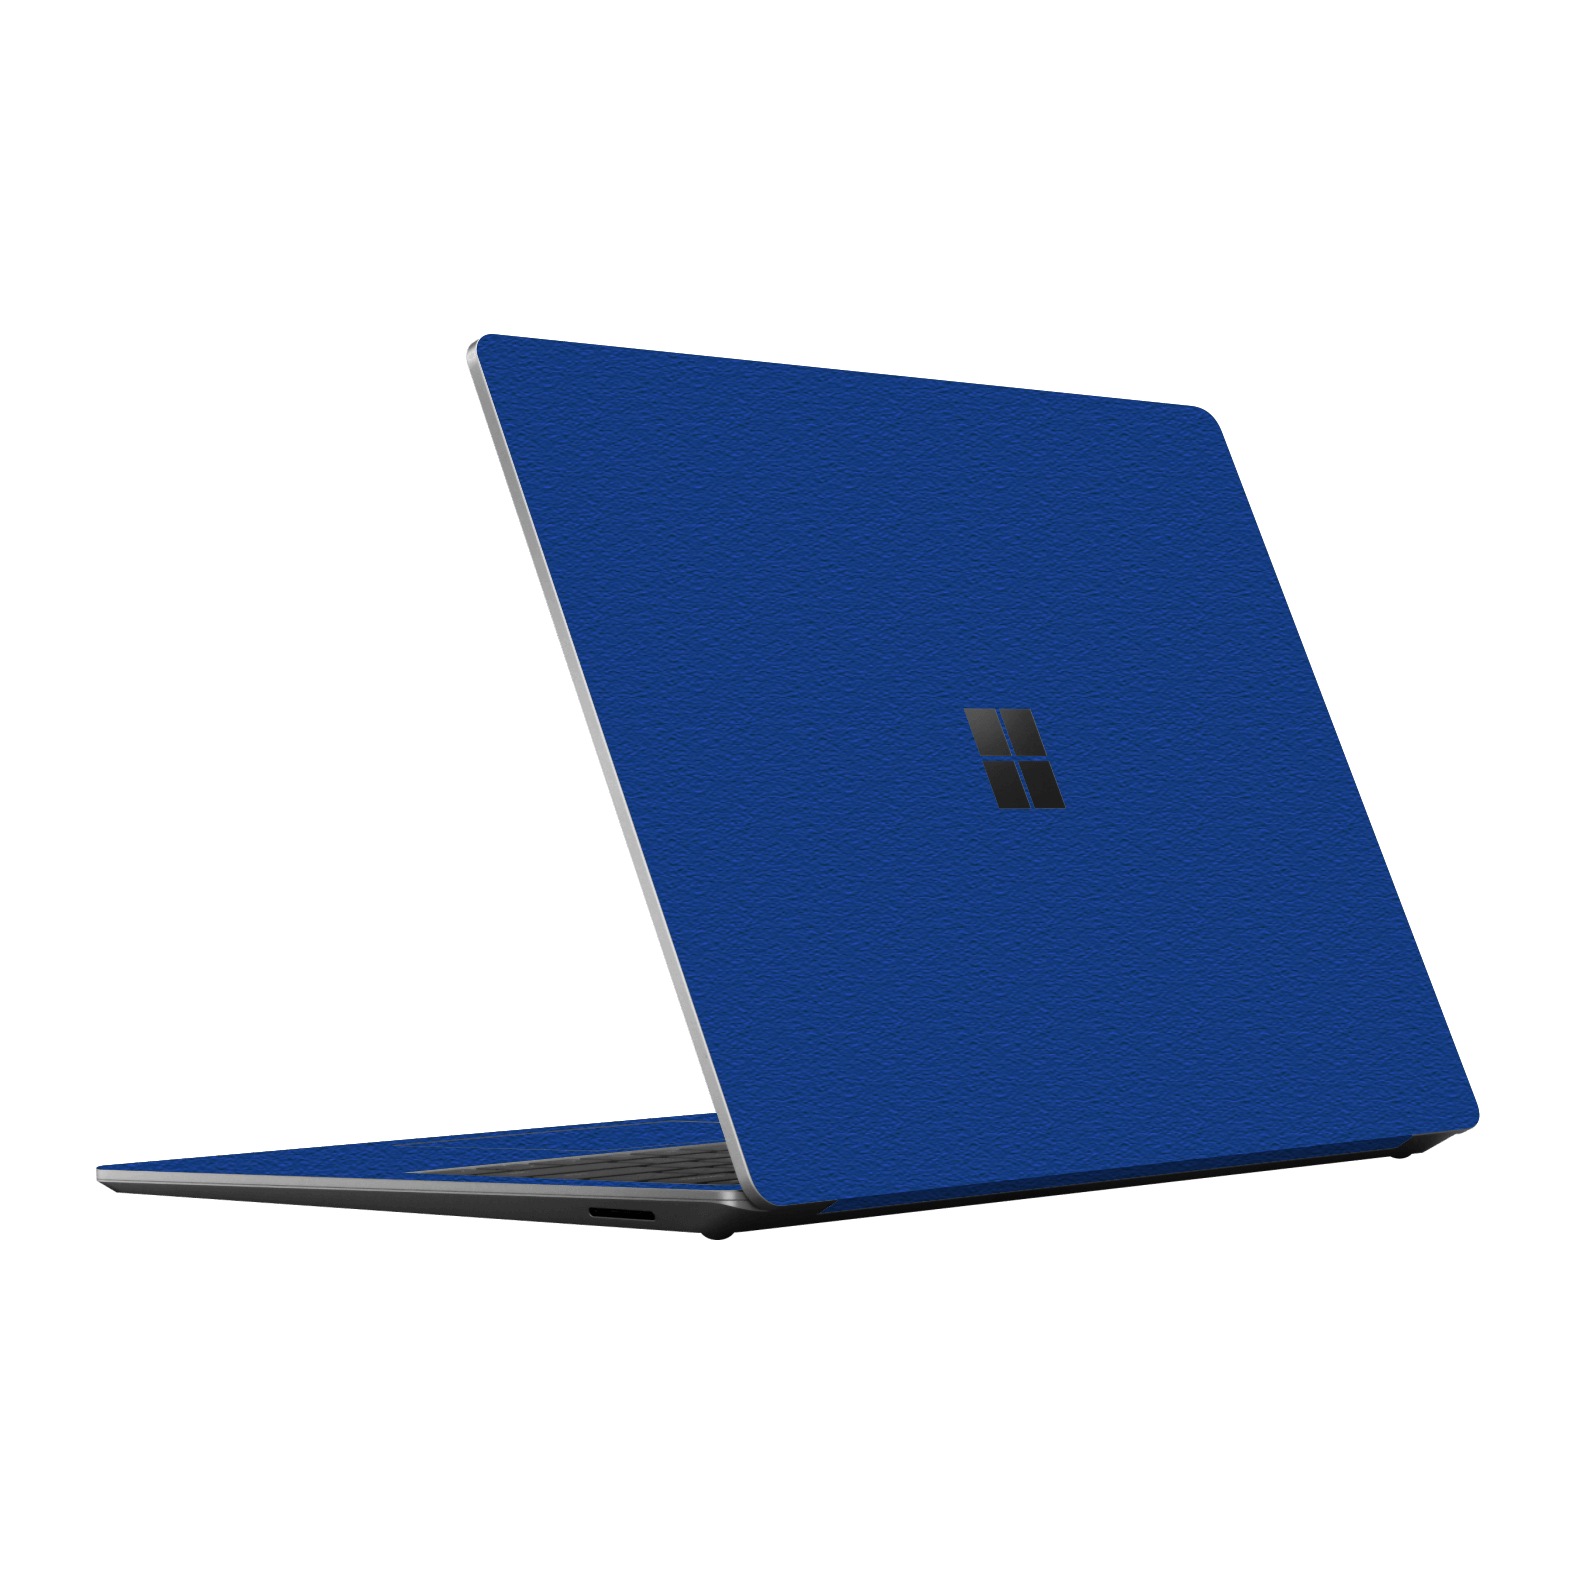 Microsoft Surface Laptop Go 3 Luxuria Admiral Blue 3D Textured Skin Wrap Sticker Decal Cover Protector by EasySkinz | EasySkinz.com